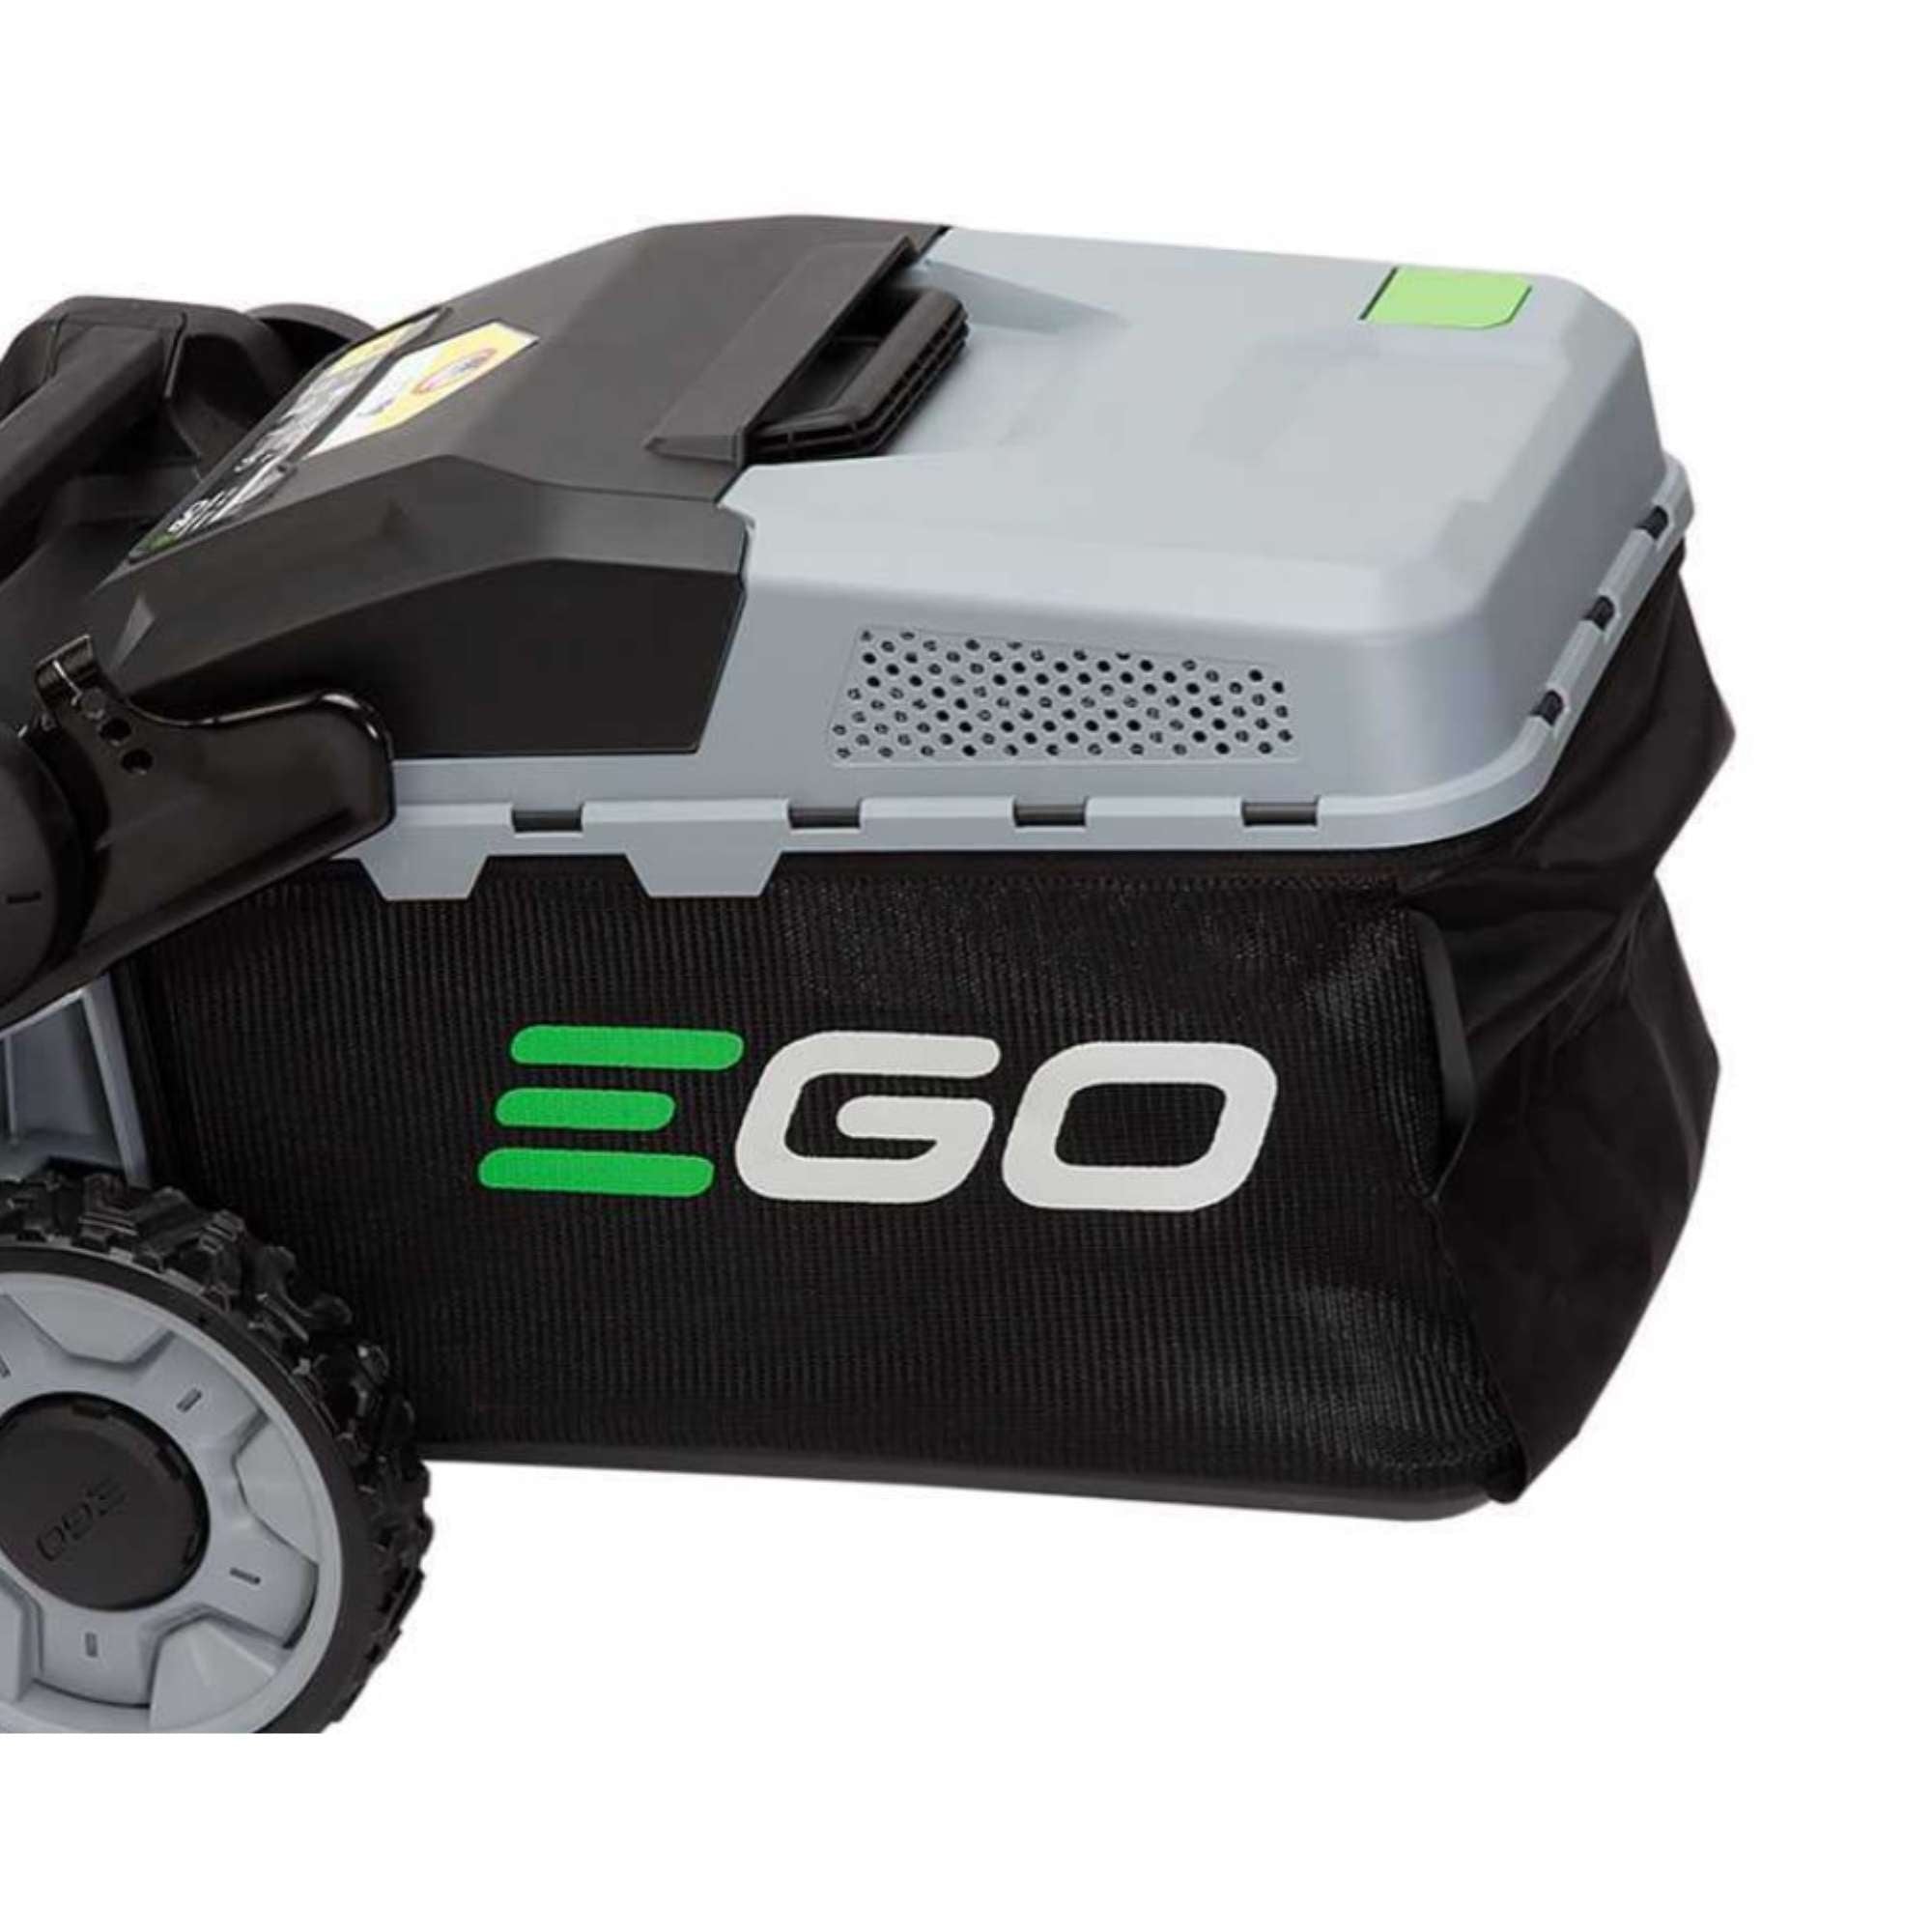 42cm mower kit + 2.5ah battery and charger - Ego 48205 LM1701E